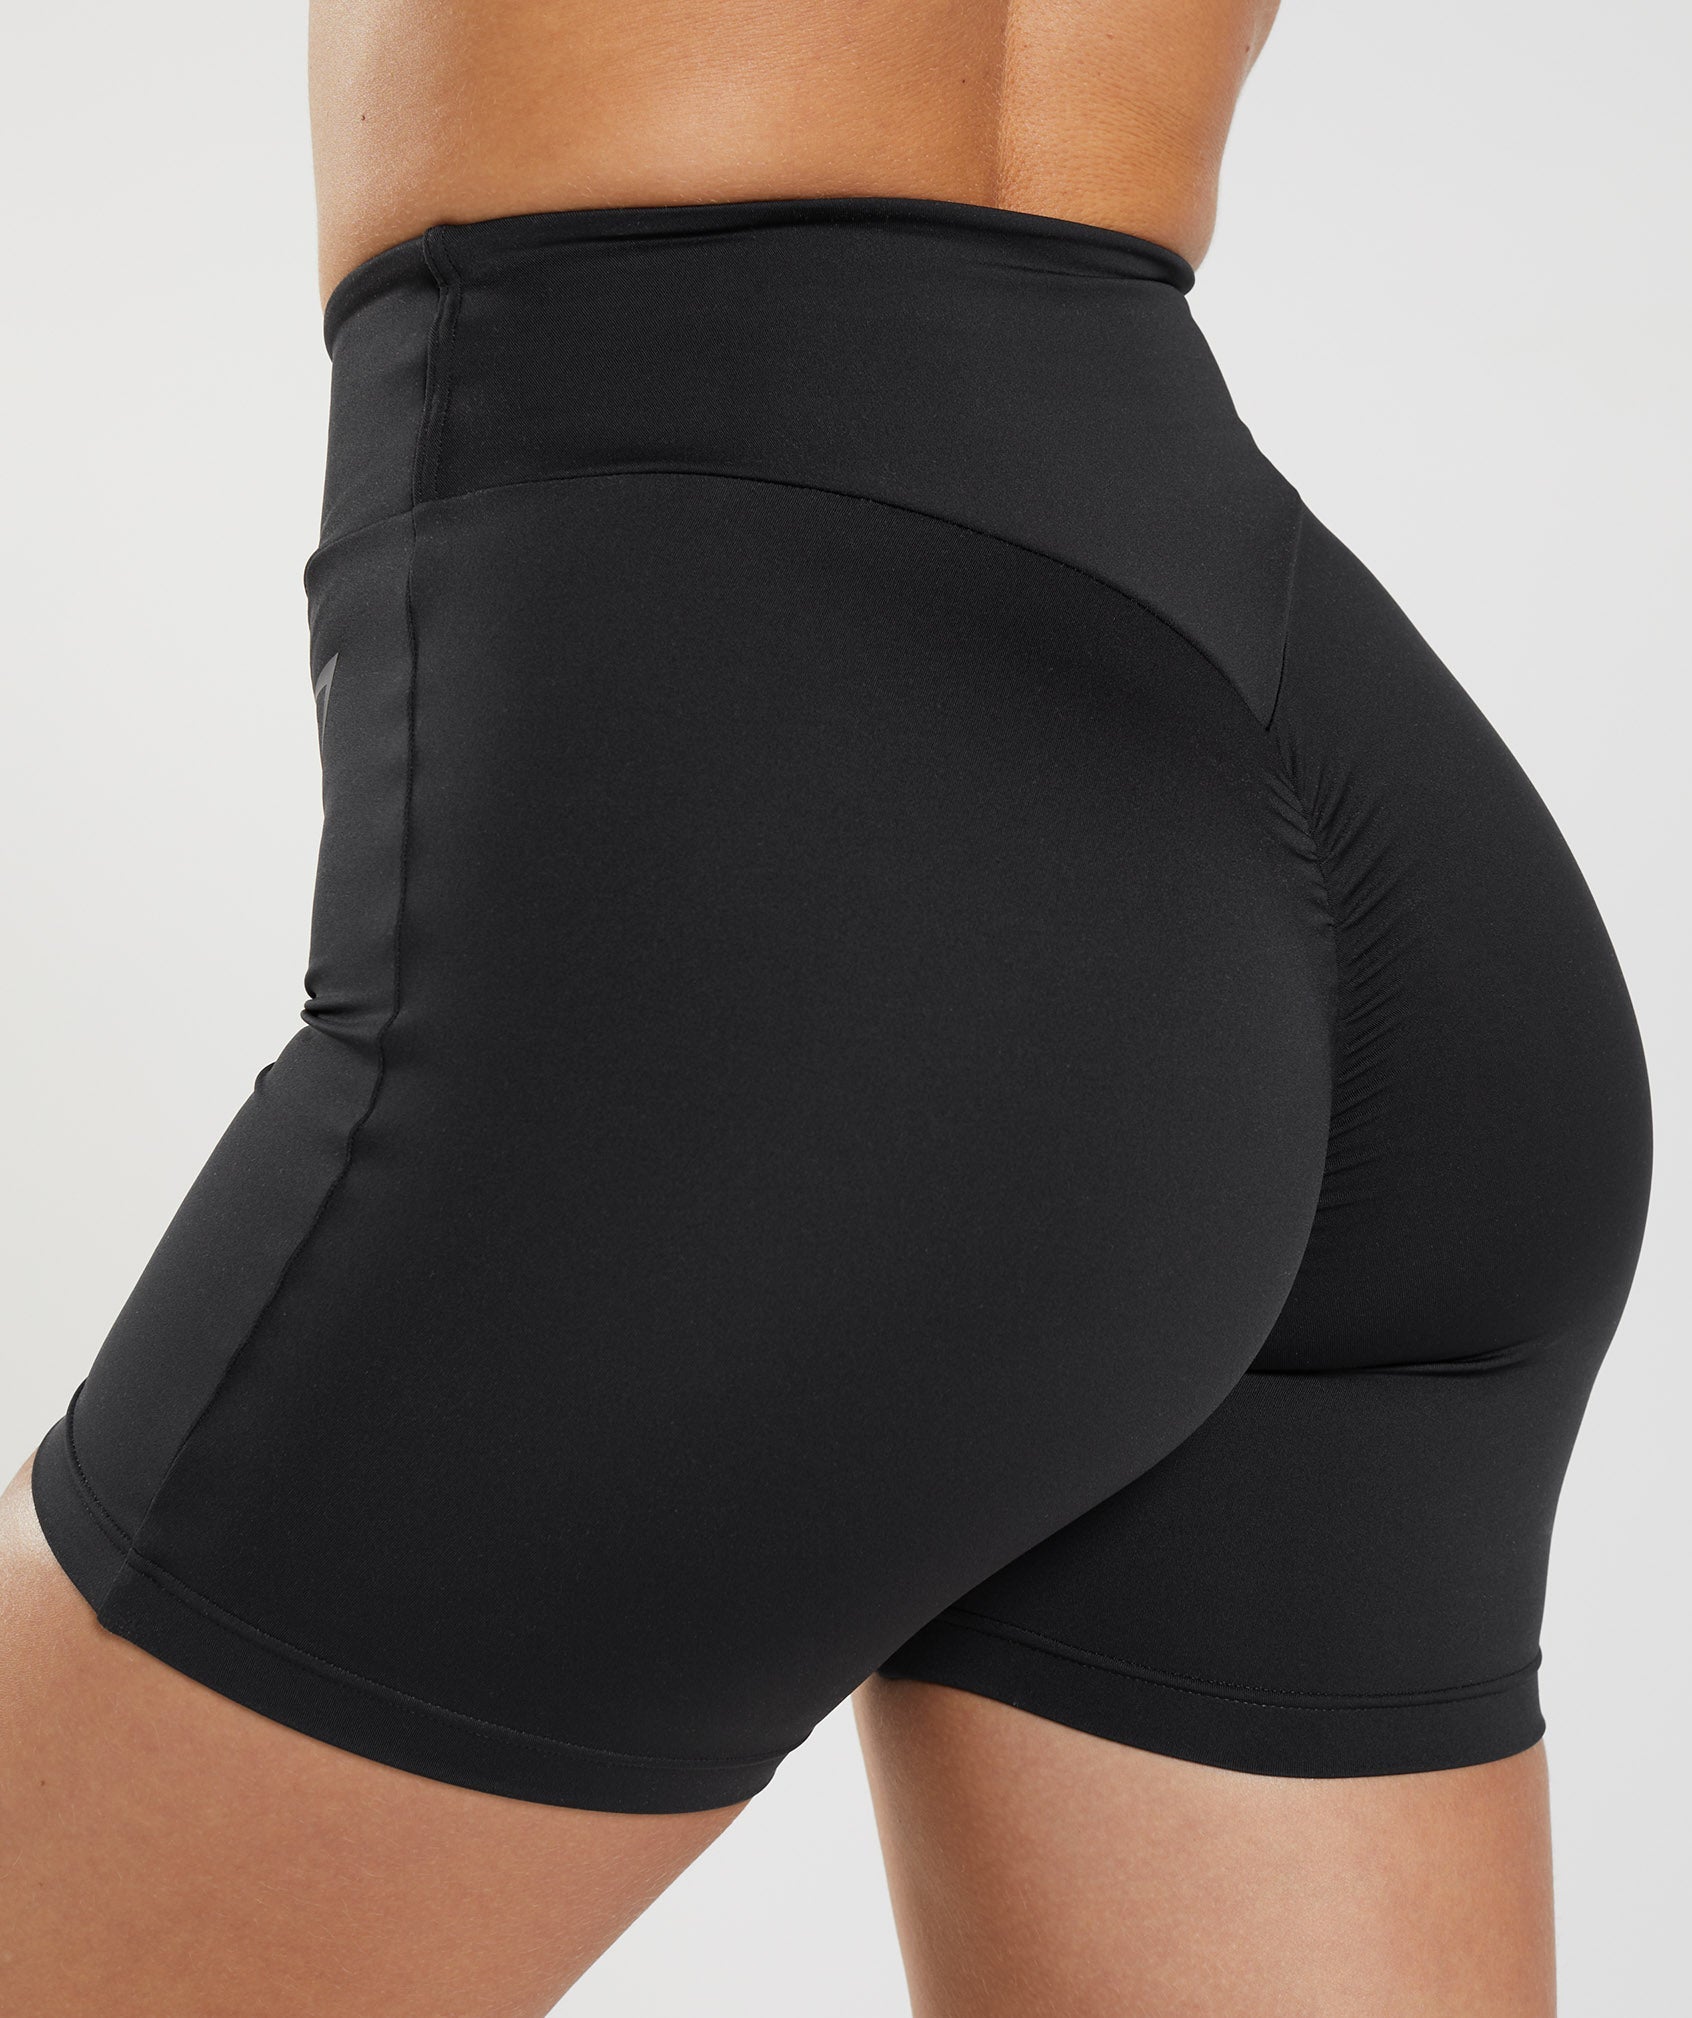 GS Power Original Tight Shorts product image 5